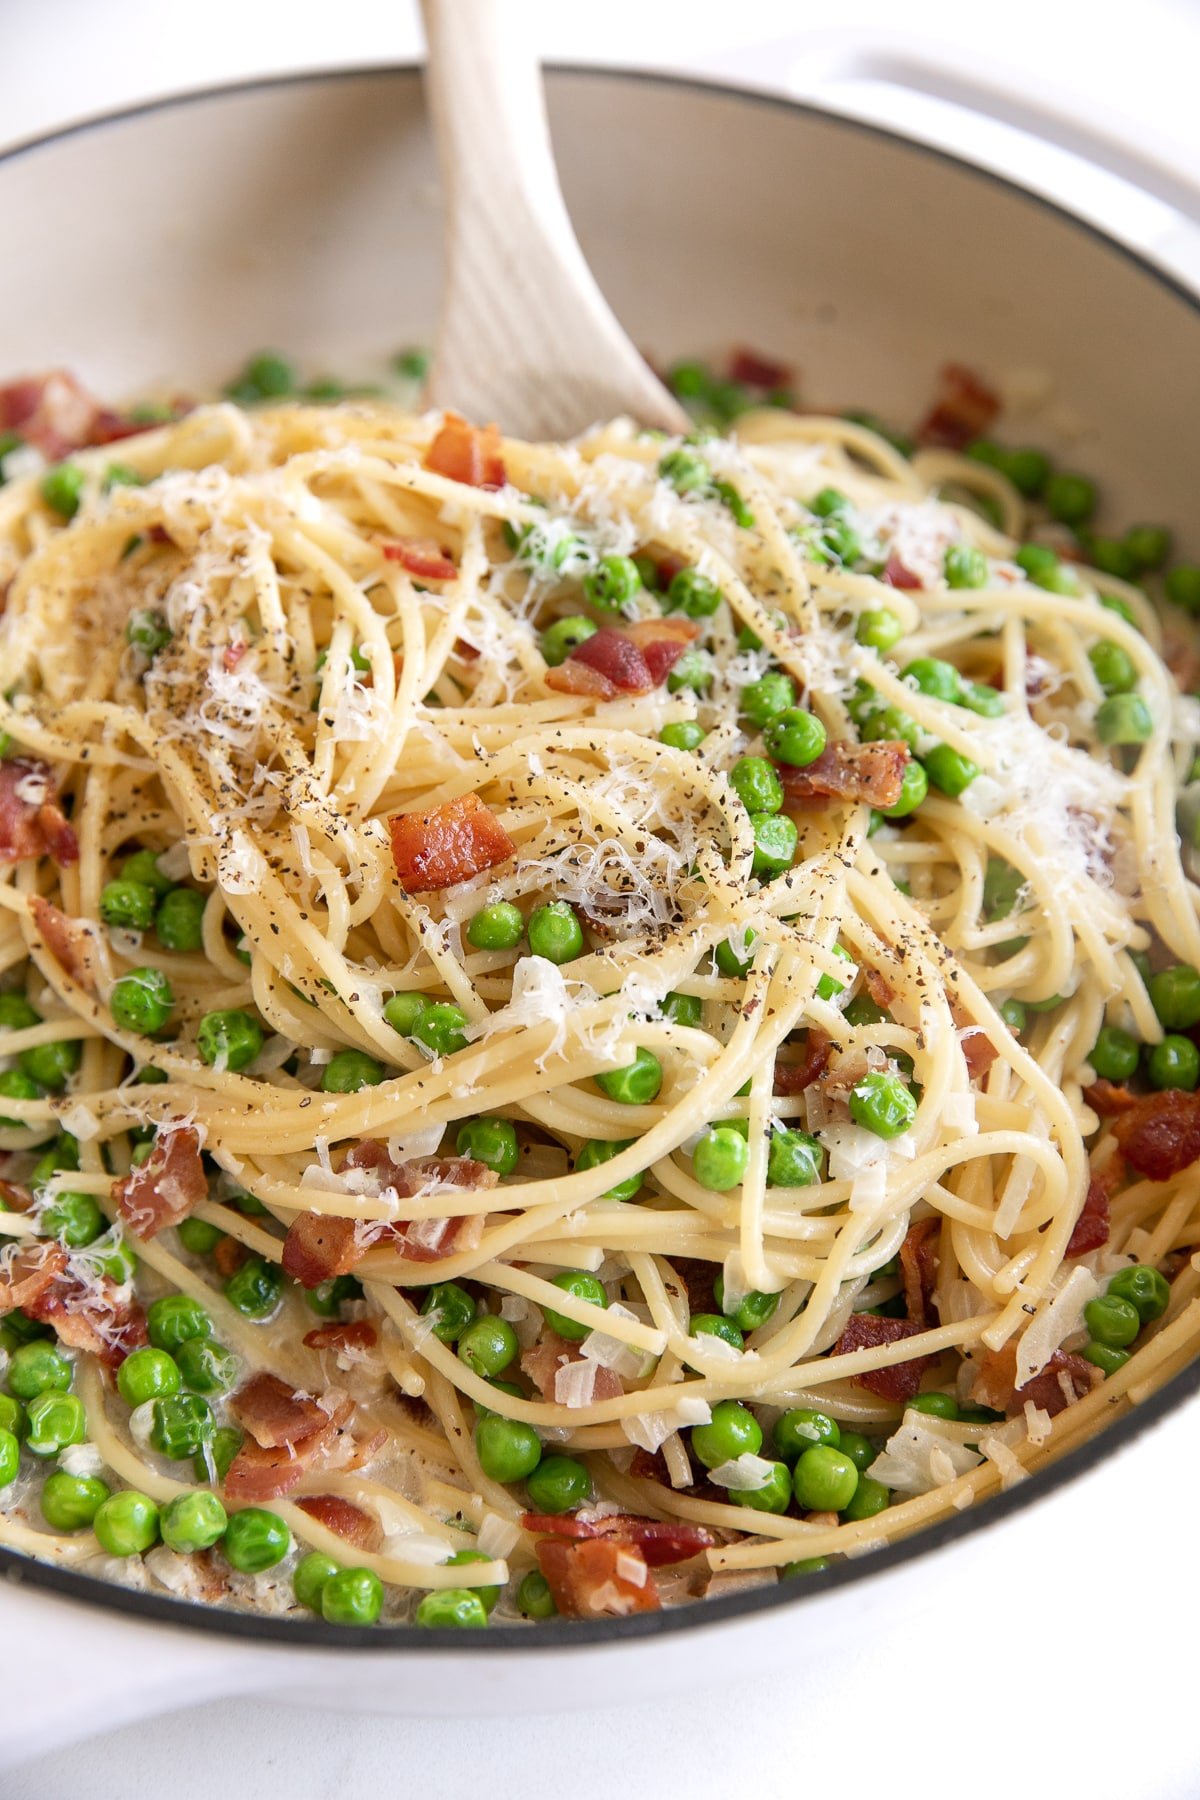 Image of spaghetti noodle pasta with bacon and peas in a cream sauce and garnished with fresh parmesan cheese and black pepper.